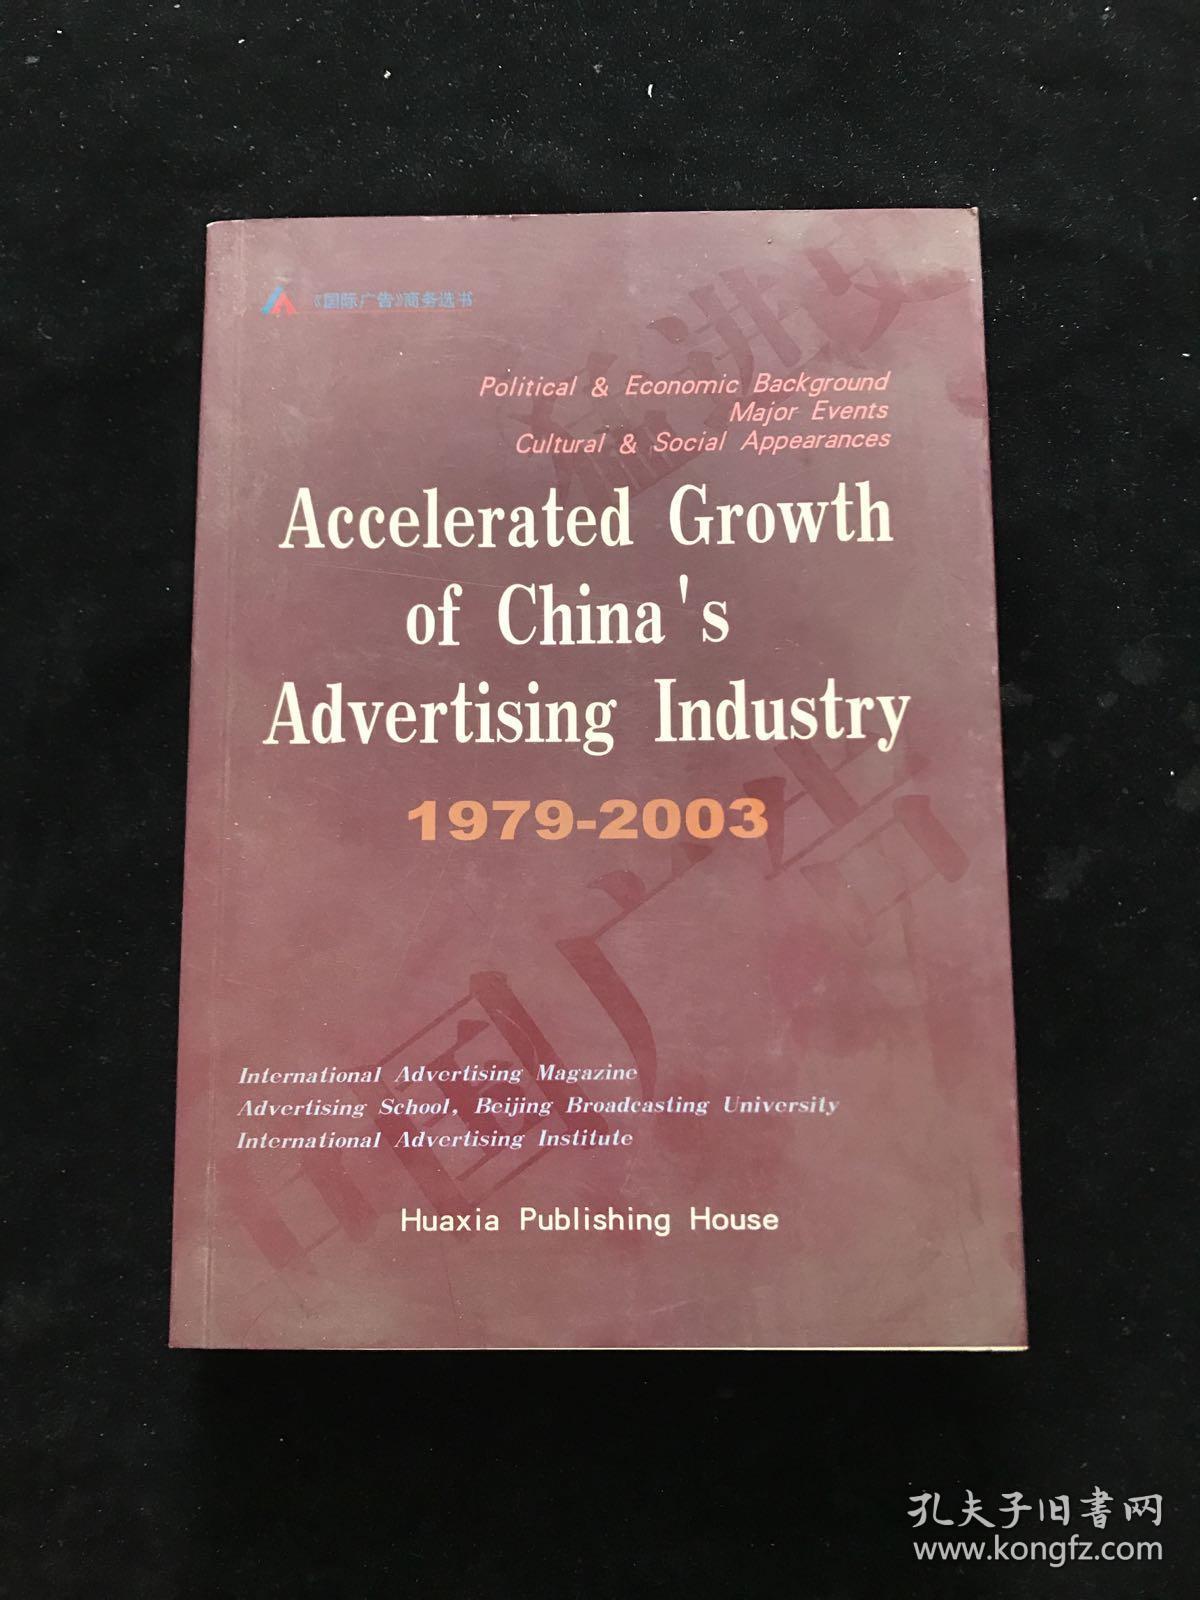 Accelerated Growth of China's Advertising Industry (1979-2003)